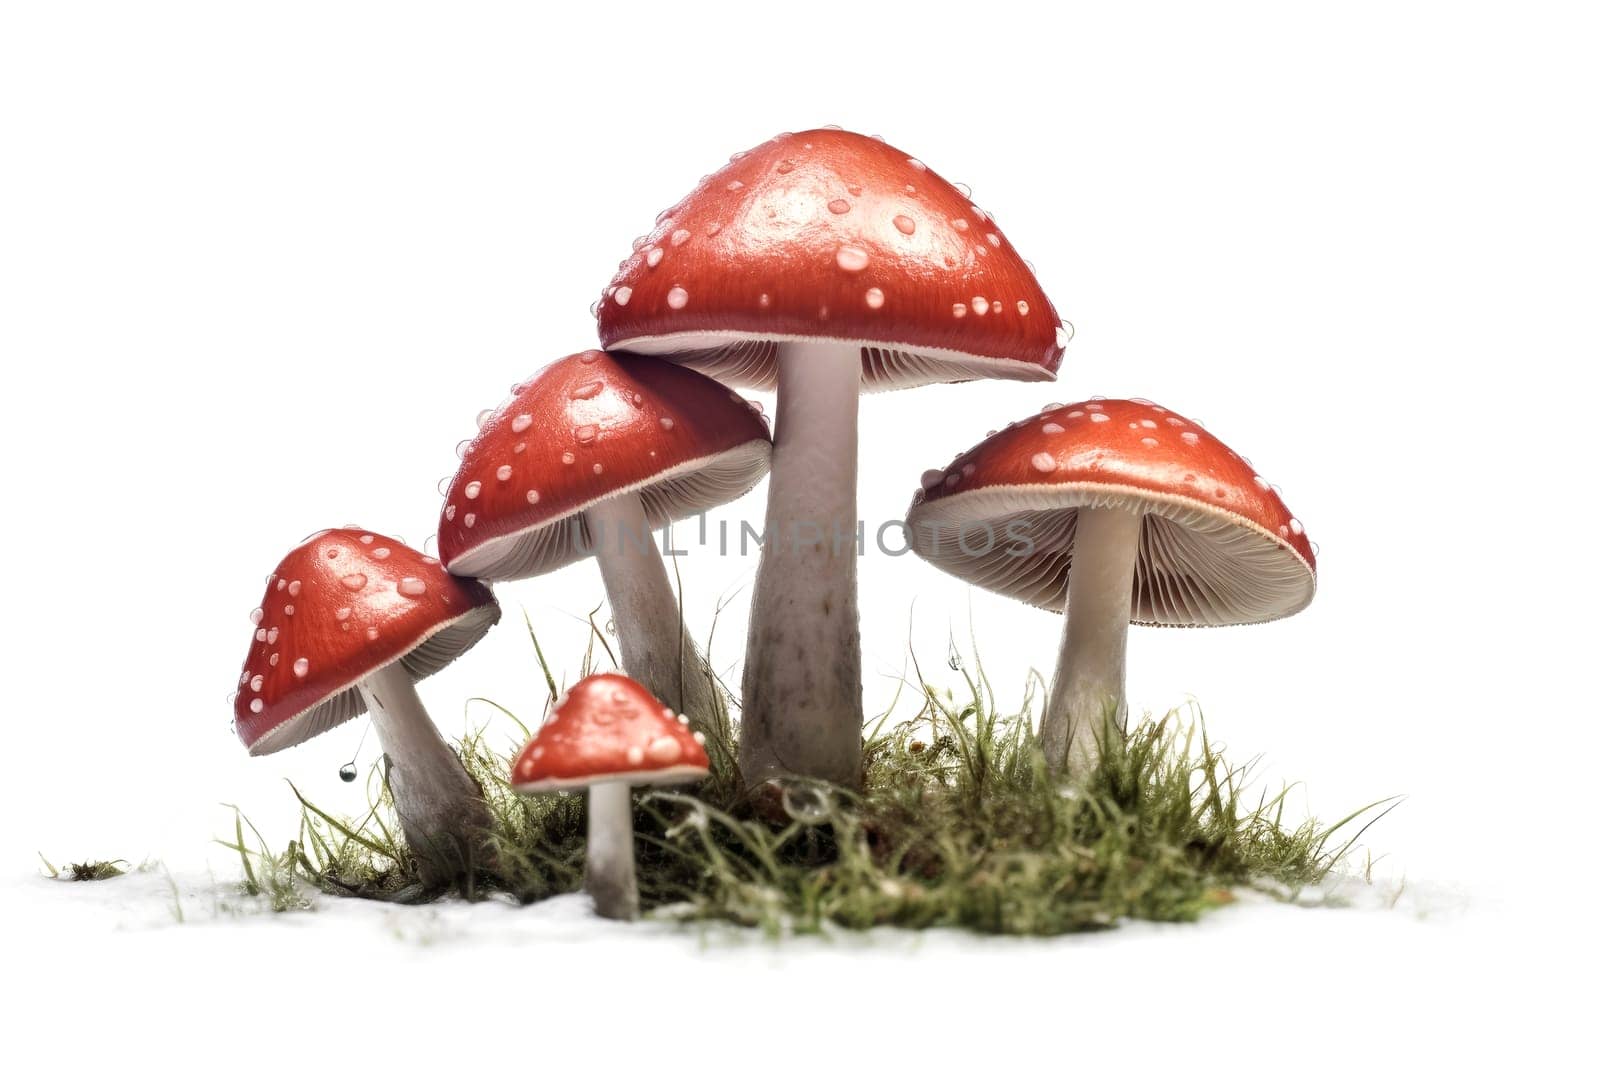 Cluster of red spotted mushrooms on a white background with green moss. Nature and fairy tale concept. Design for educational material about fungi. Isolated macro shot with a clear focus